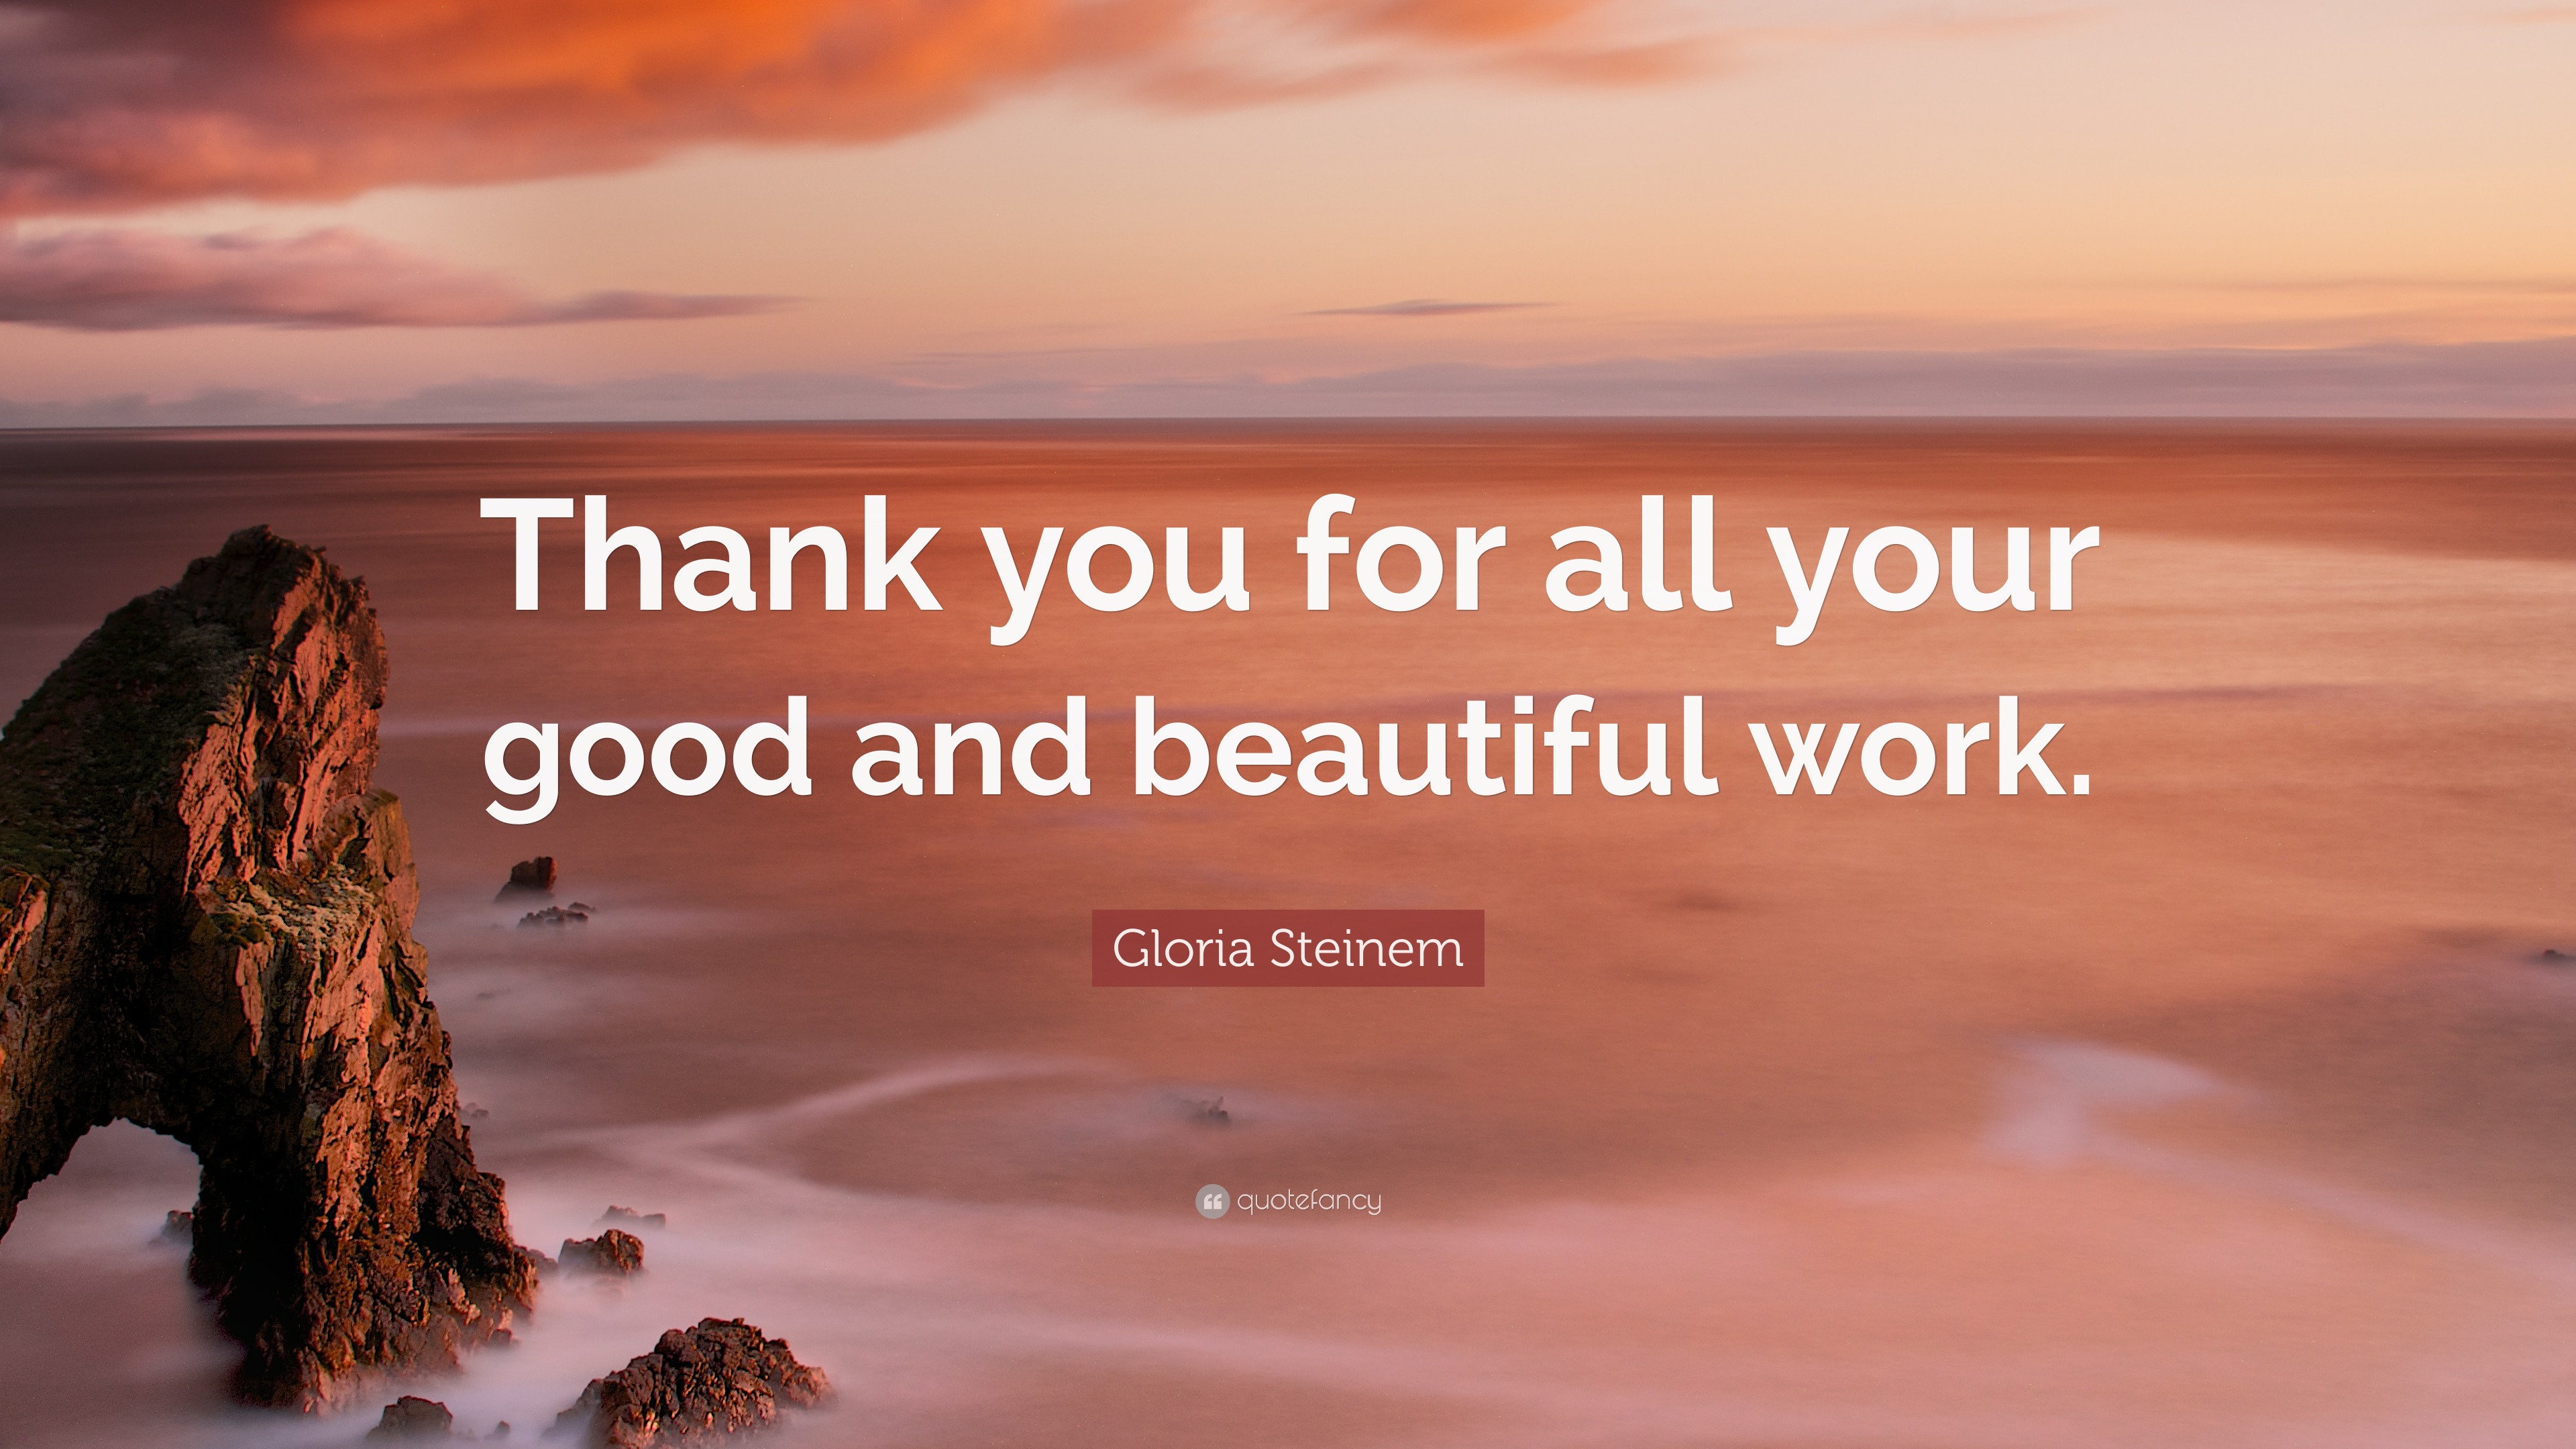 Gloria Steinem Quote: “Thank you for all your good and beautiful work.”